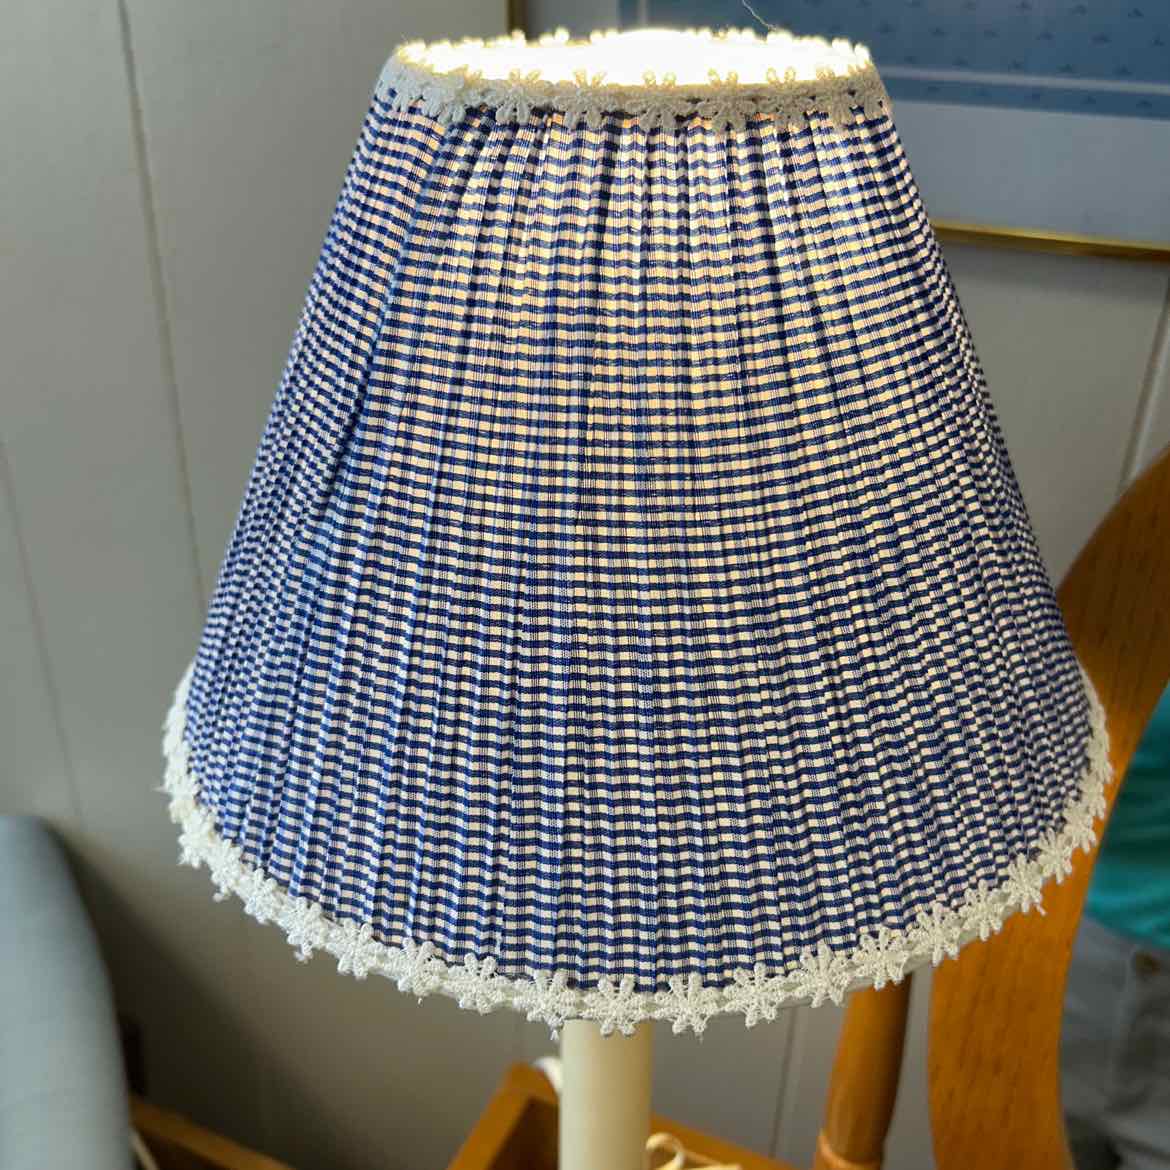 White Base Lamp w/Blue Checked Shade